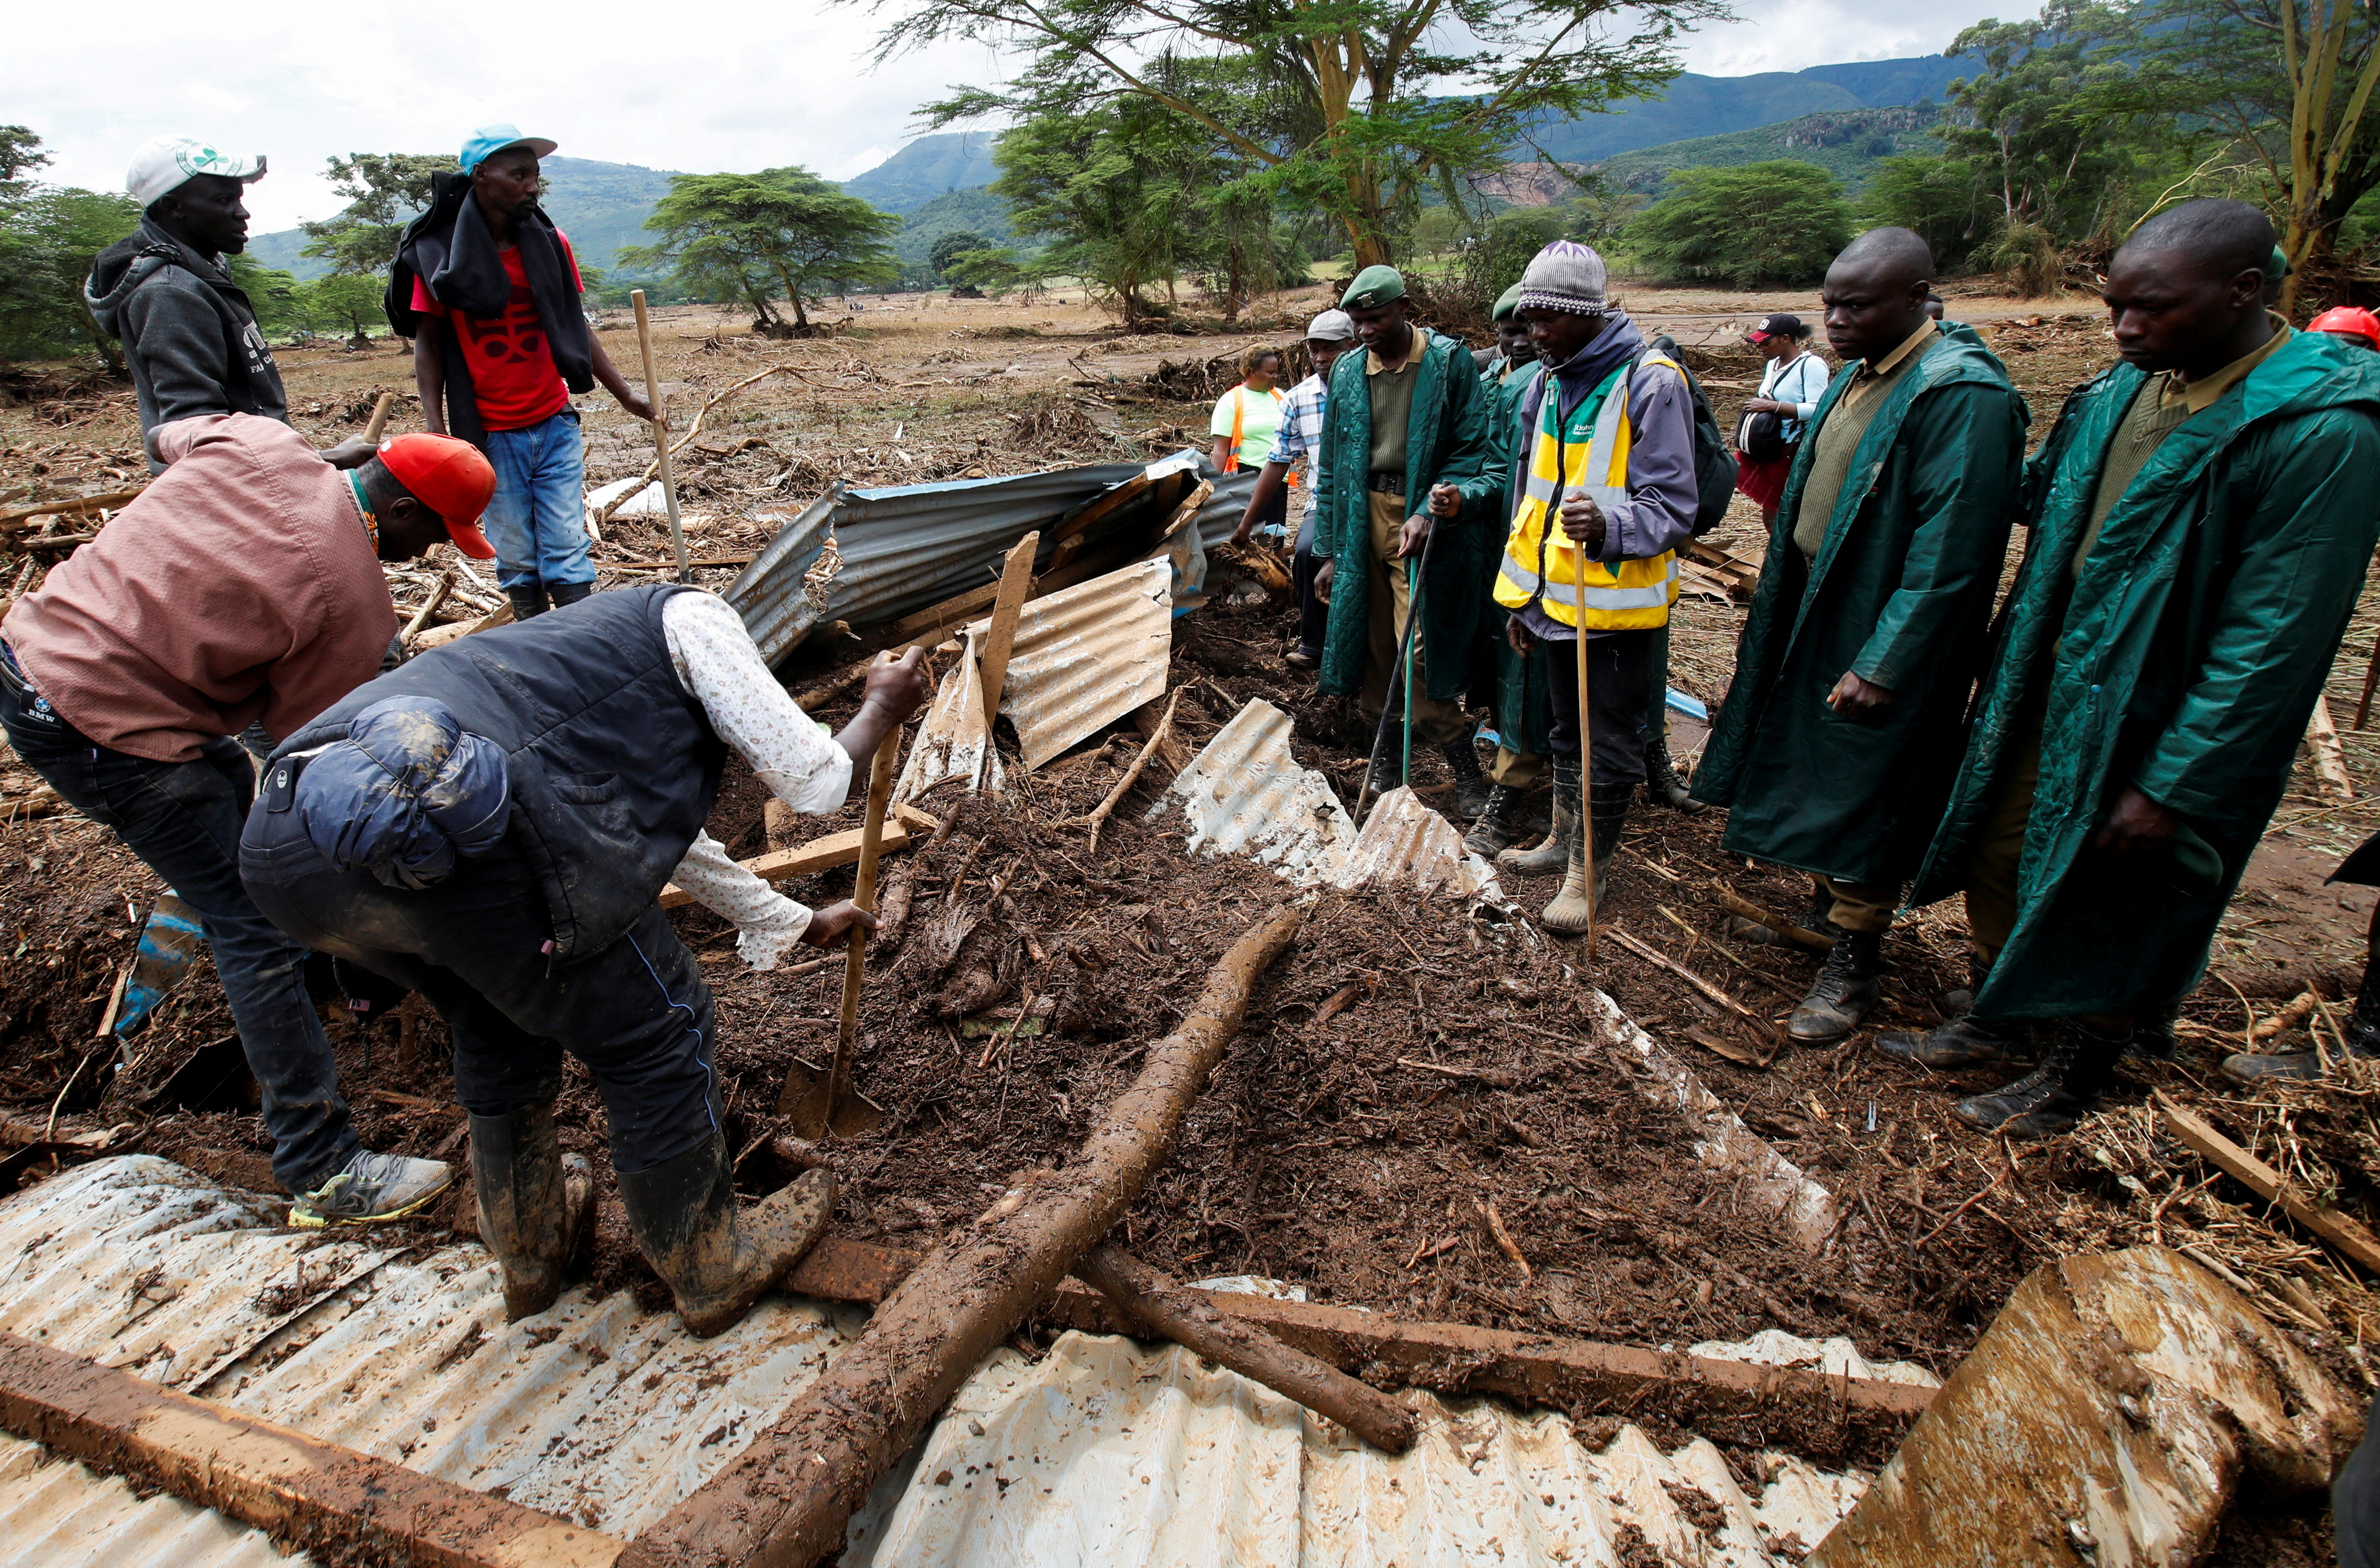 Kenya Red Cross says responding to landslide in area in centre of country